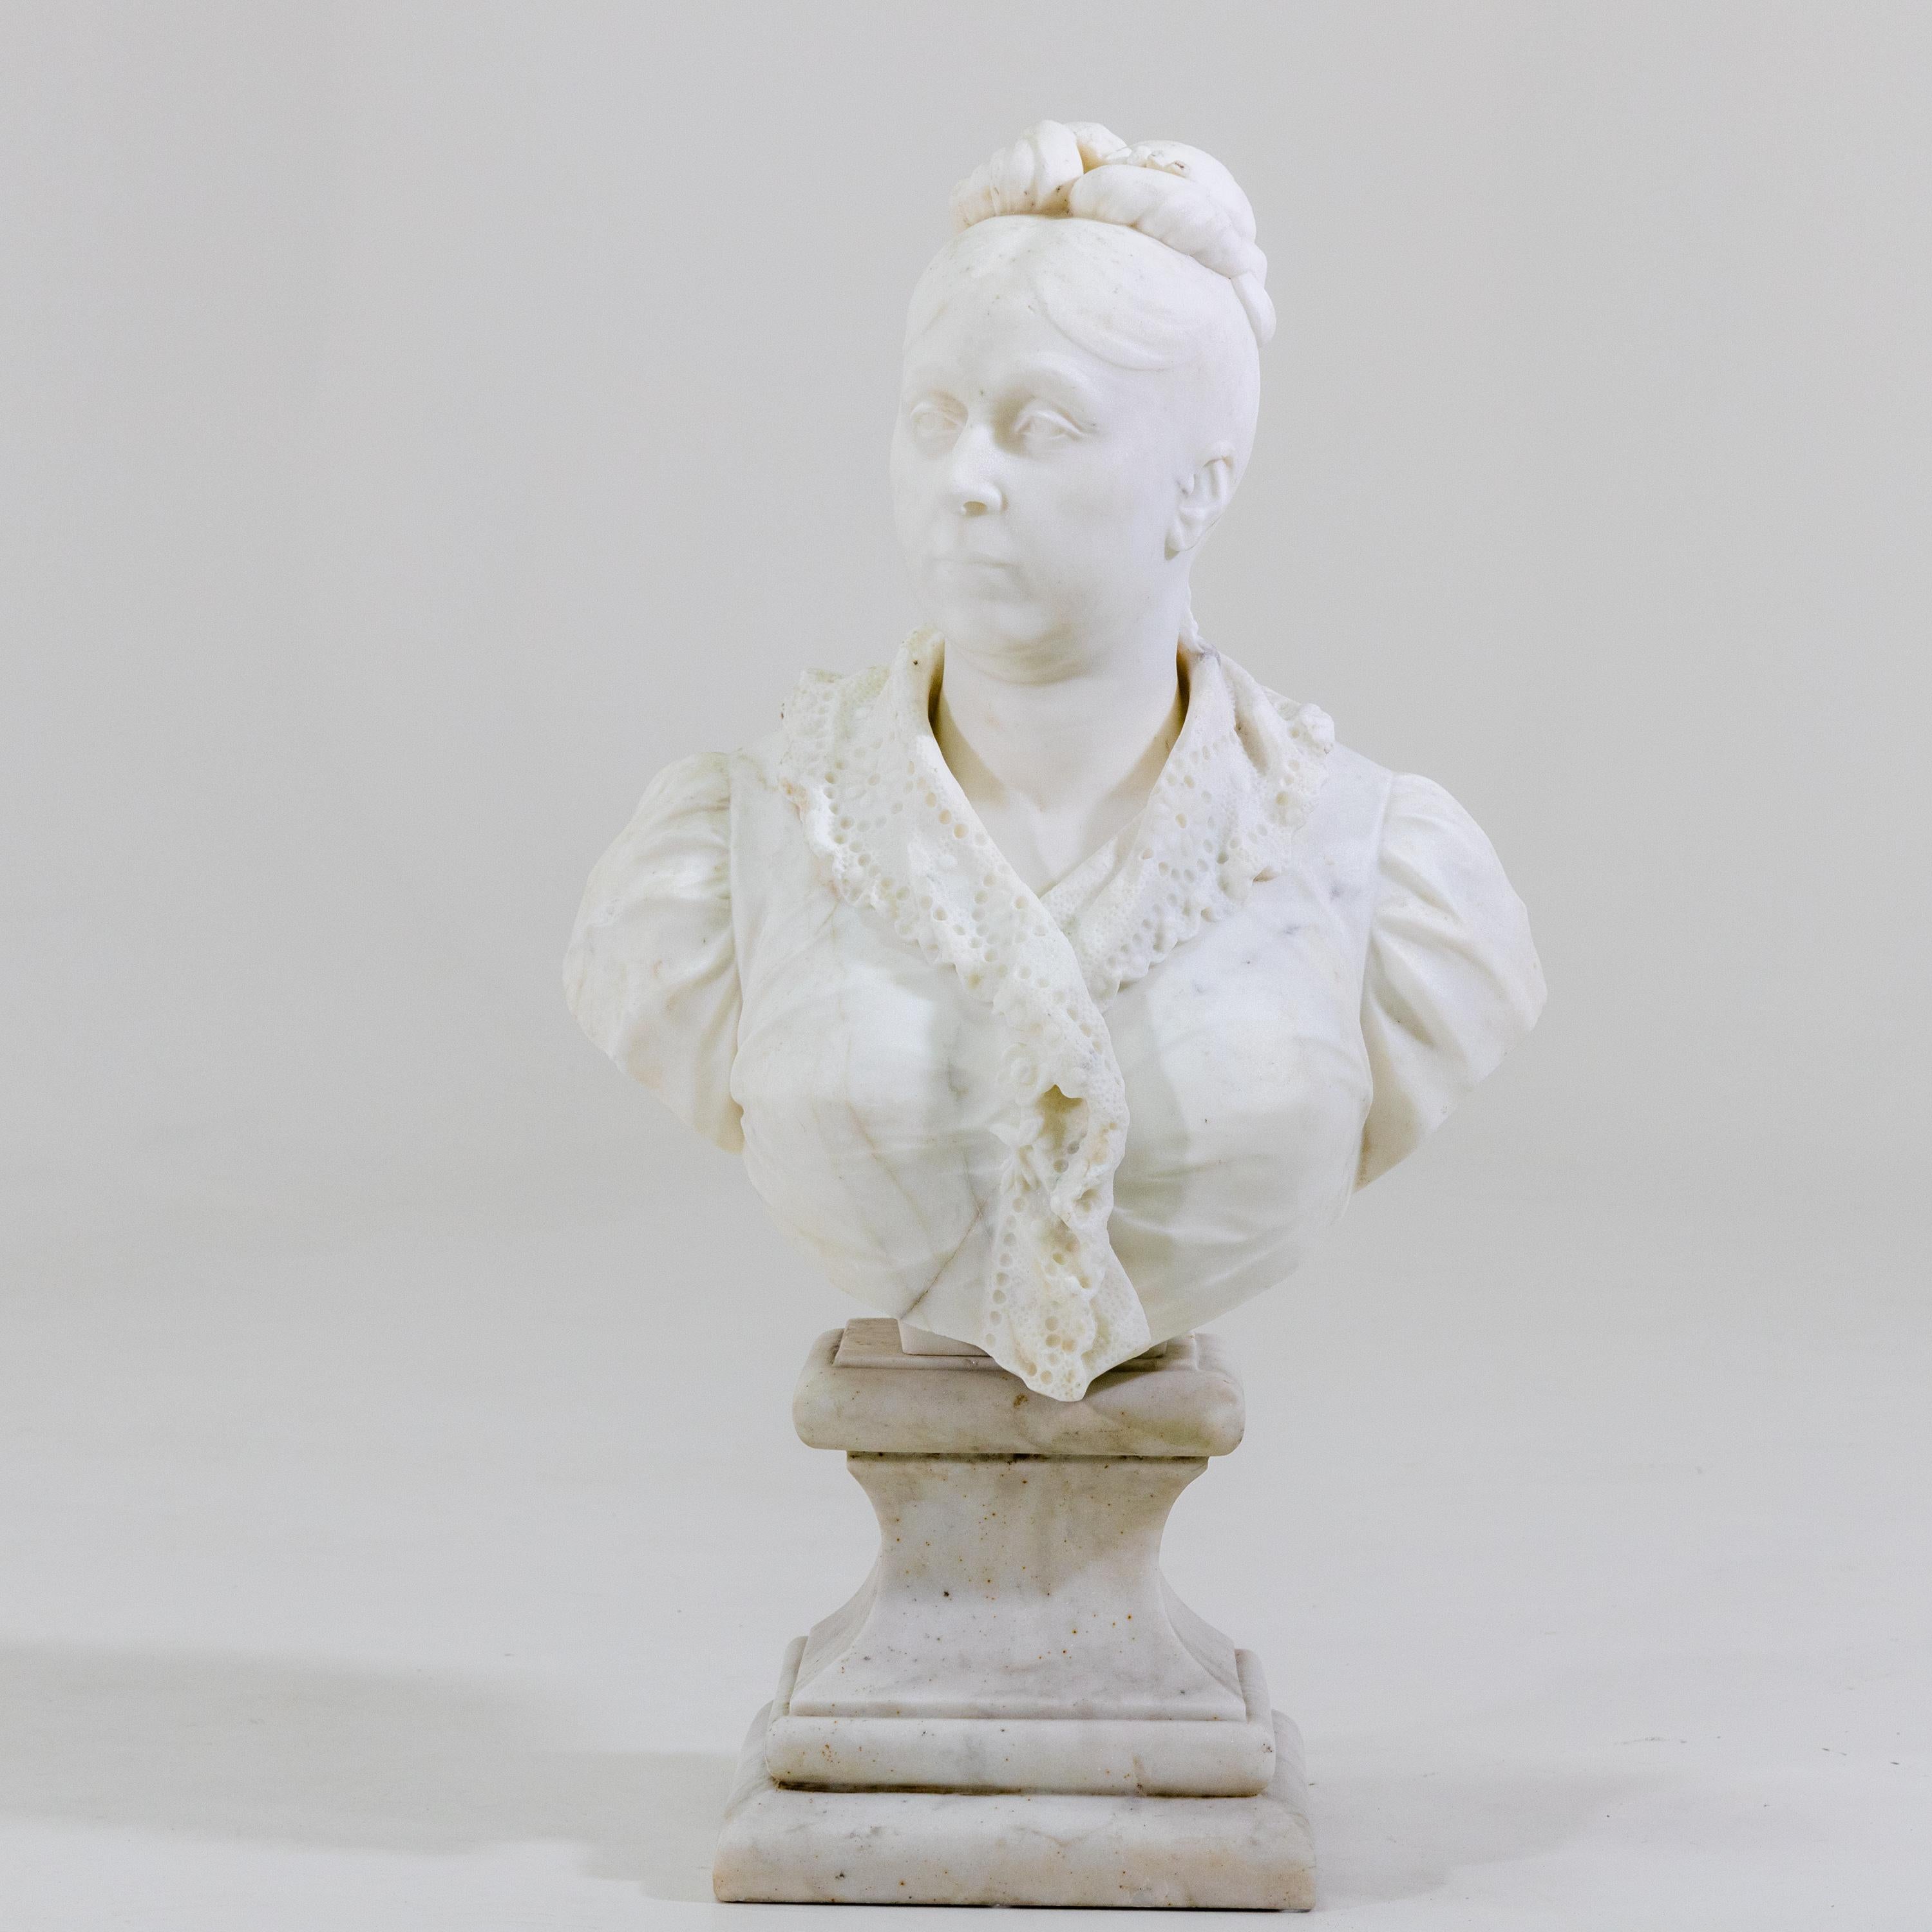 Marble bust of a middle-aged woman with updo and lace-trimmed top standing on a profiled plinth. Her head is slightly turned to the left. Very nice, detailed elaboration.